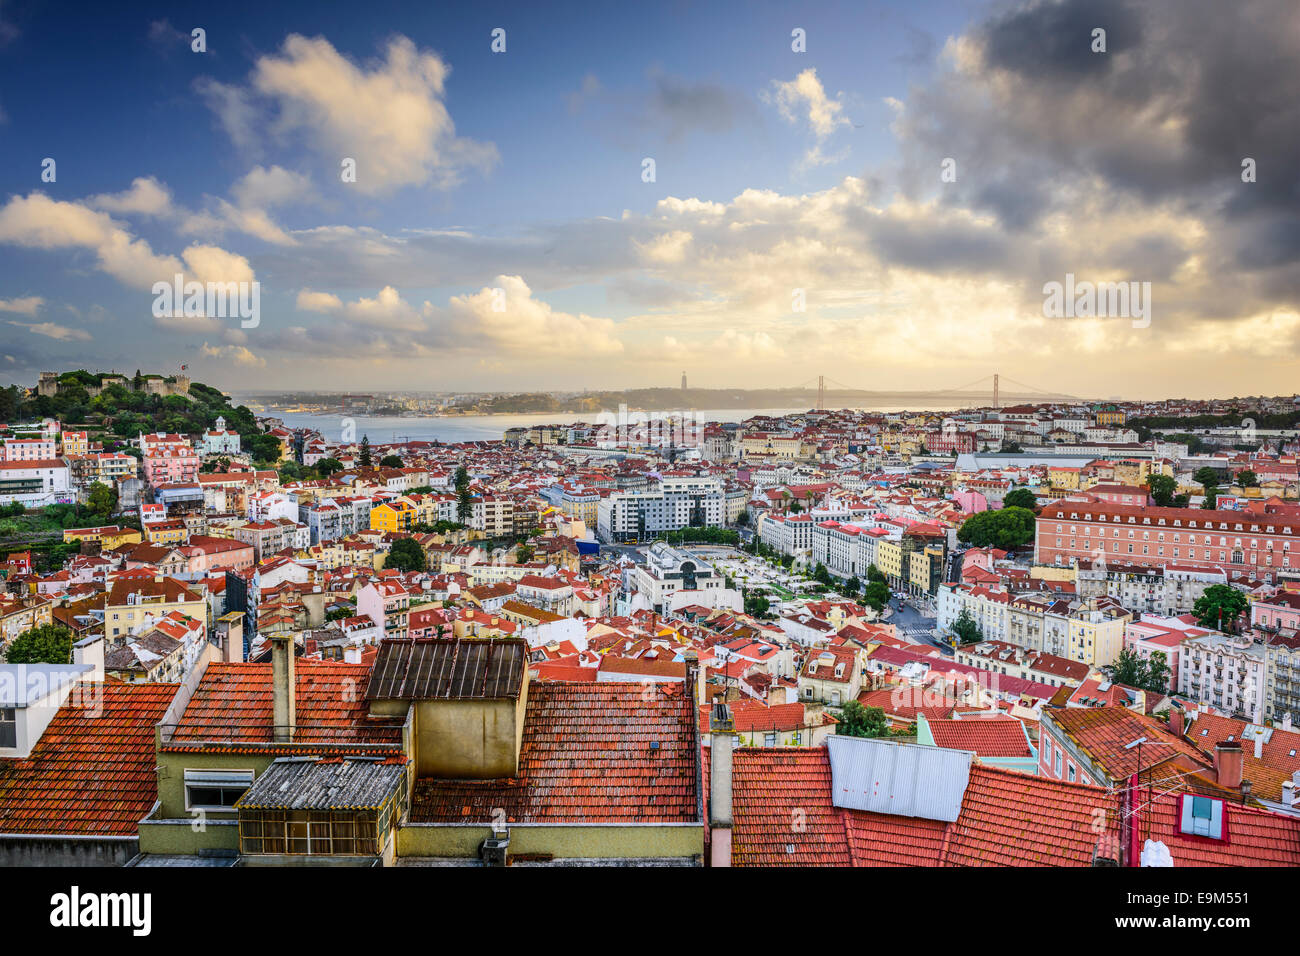 Lisbon, Portugal skyline in the afternoon. Stock Photo